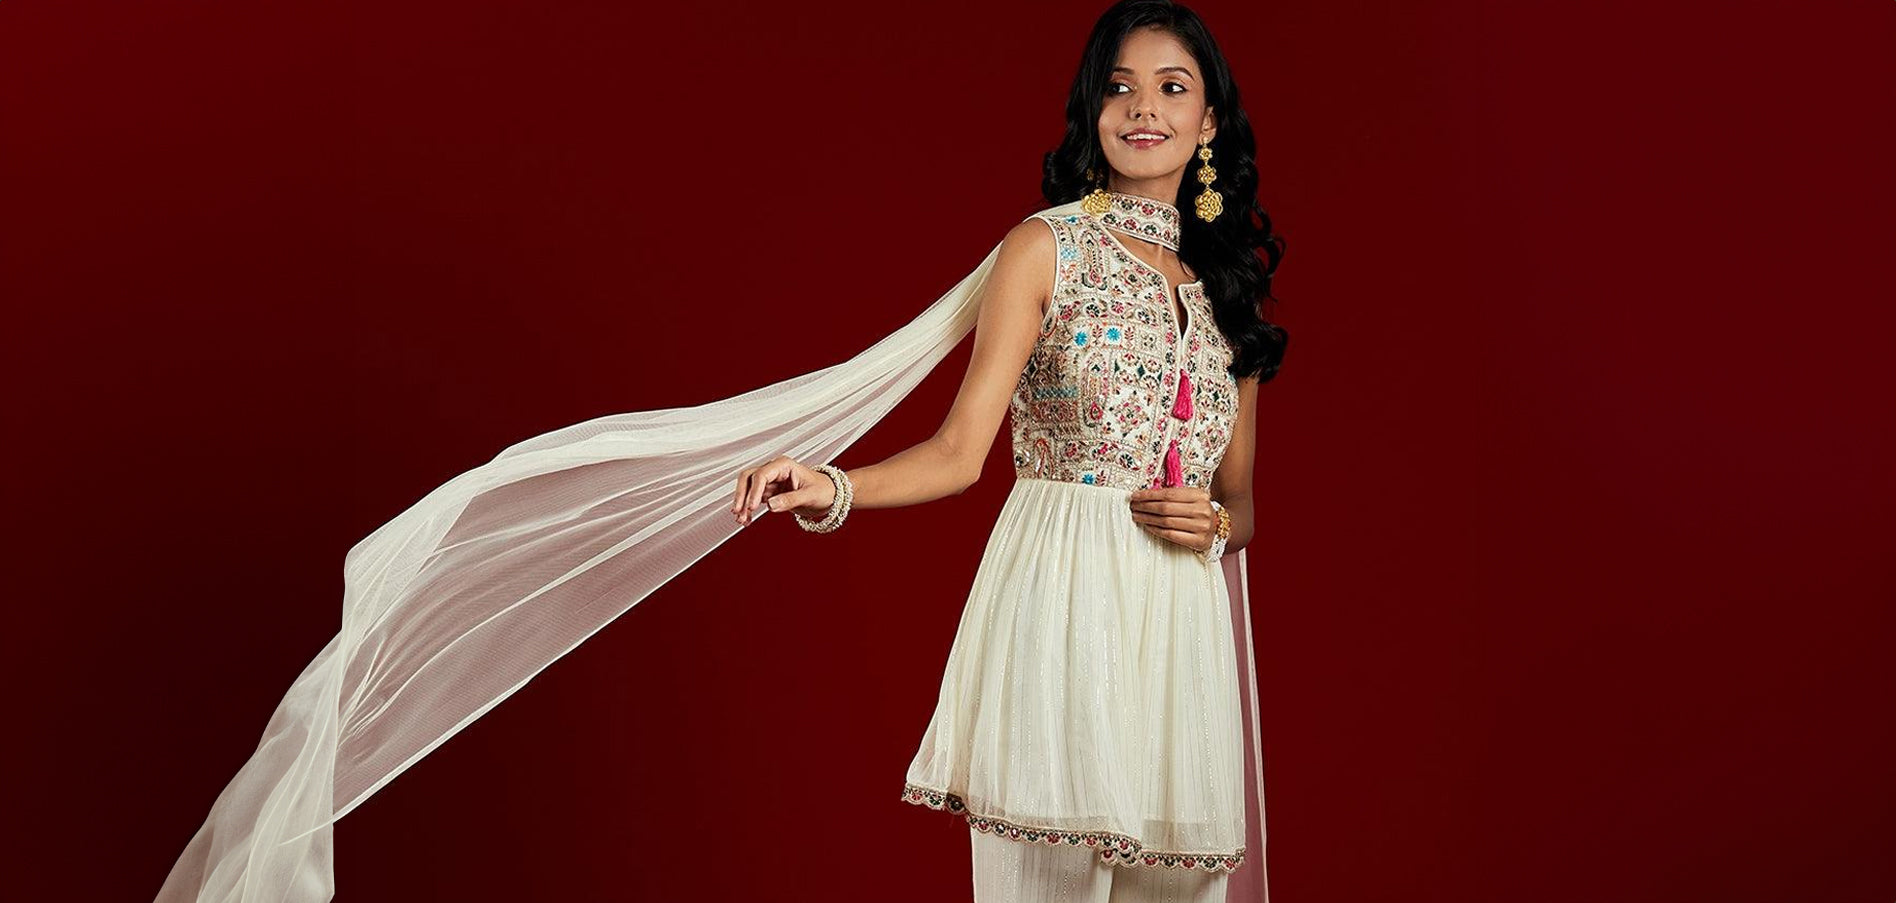 lehengas and Bridal gowns for a fun cocktail evening | Studio 149